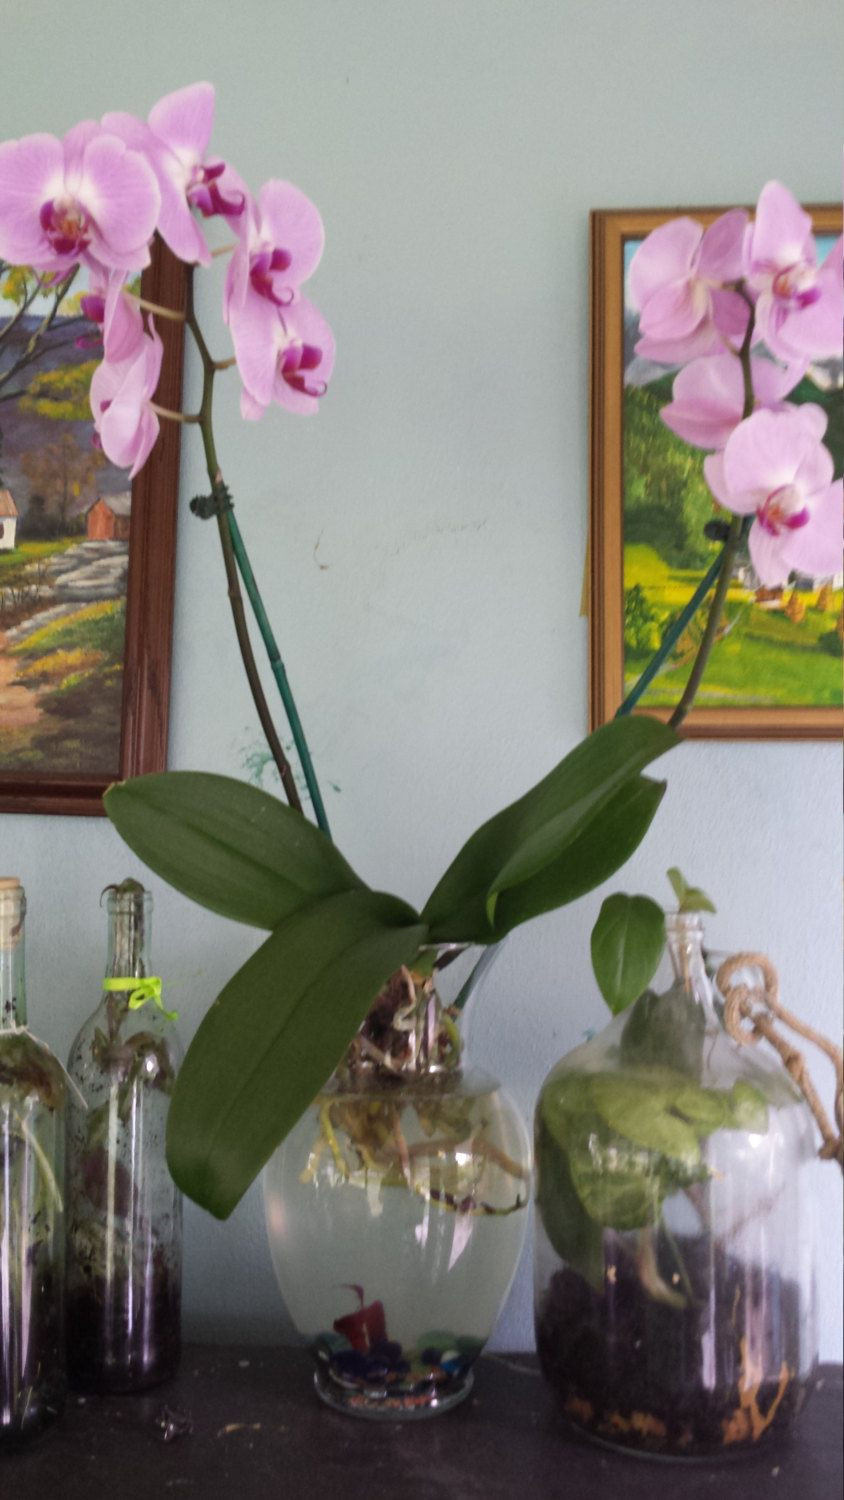 27 Famous Beta Plant Vase 2023 free download beta plant vase of orchid beta tank beautiful and symbioticnow available with lights for beauty simplicity and symbioticism honestly my favorite discovery in his horticultural journey i have